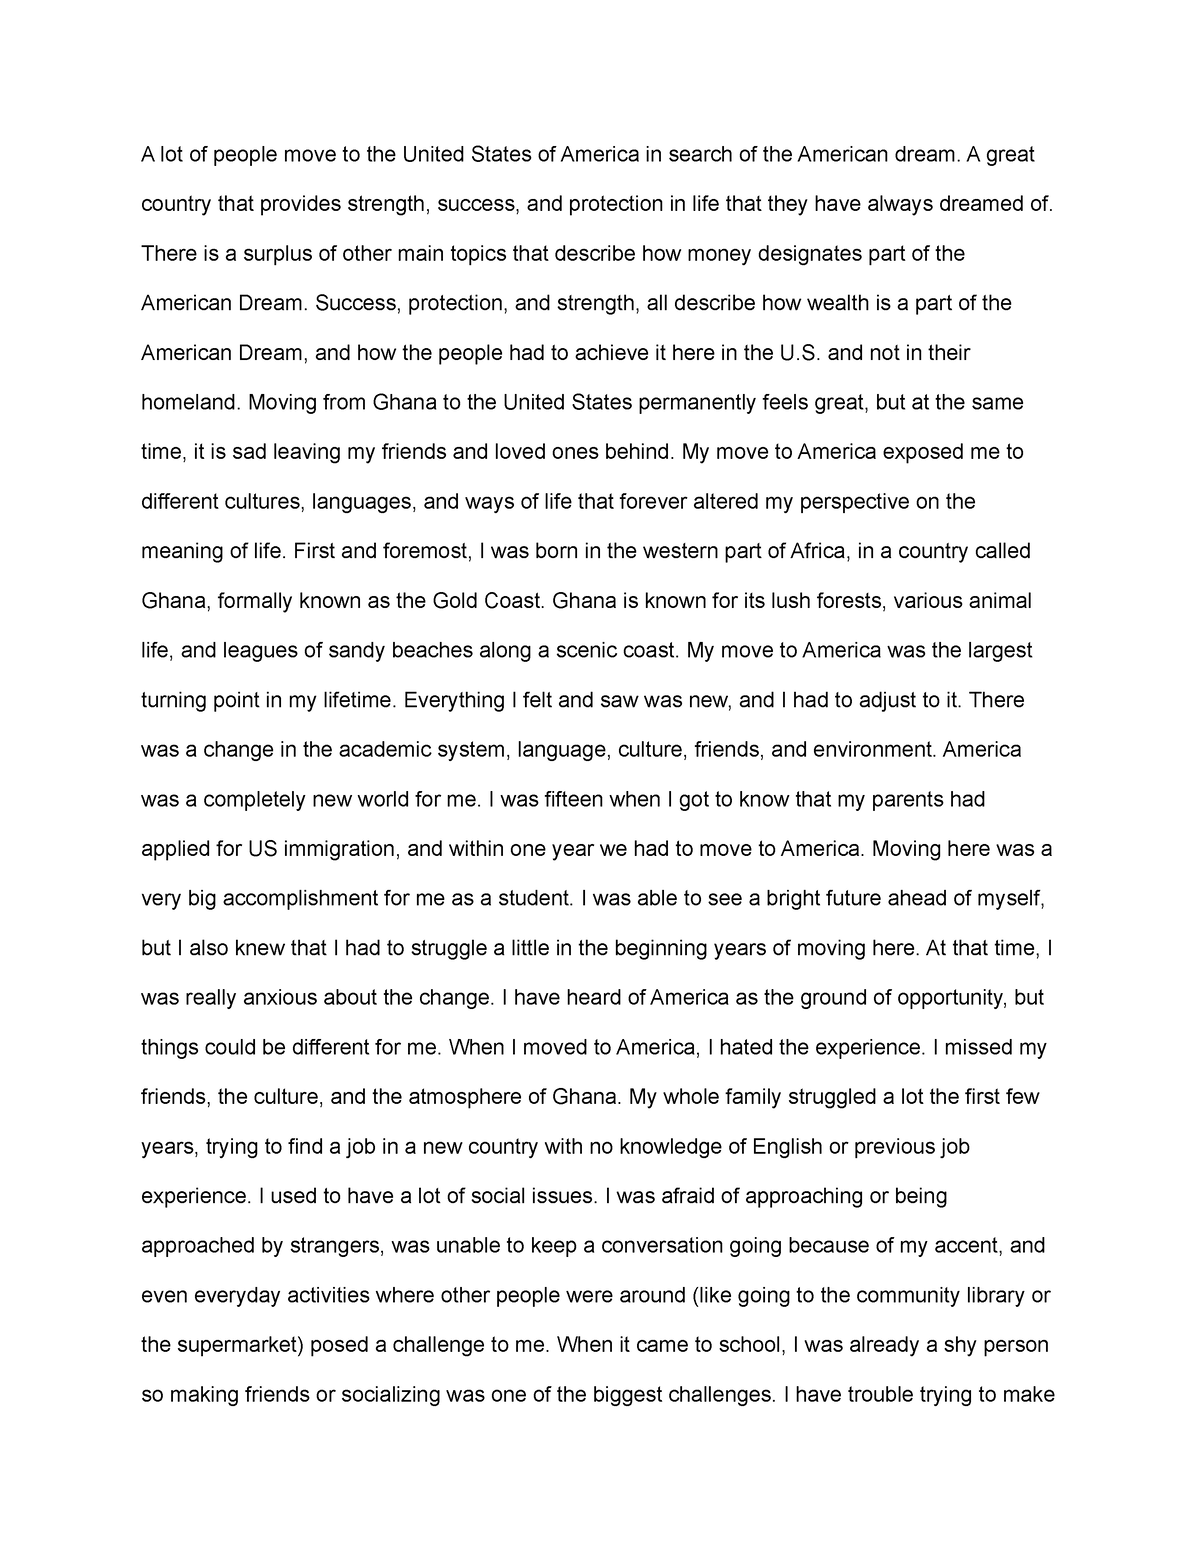 college essay moving to a new country